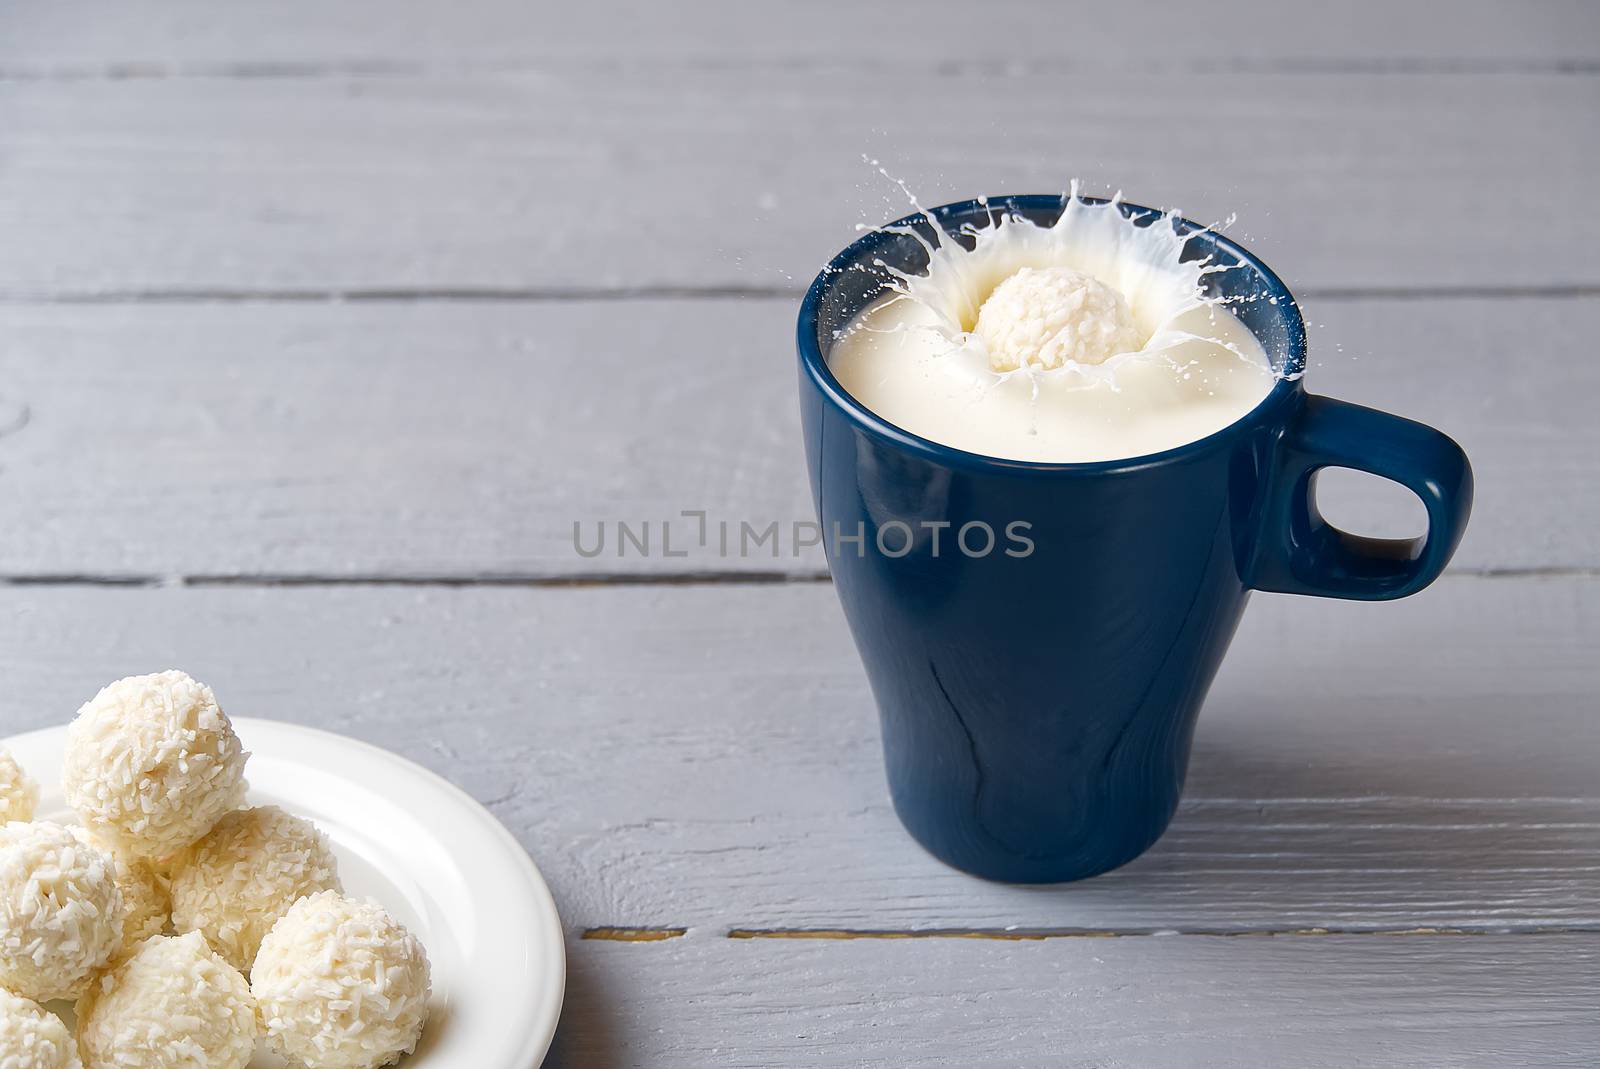 coconut cookies fell into a blue mug of milk. splashes of milk in a mug caused by a drop of coconut truffle